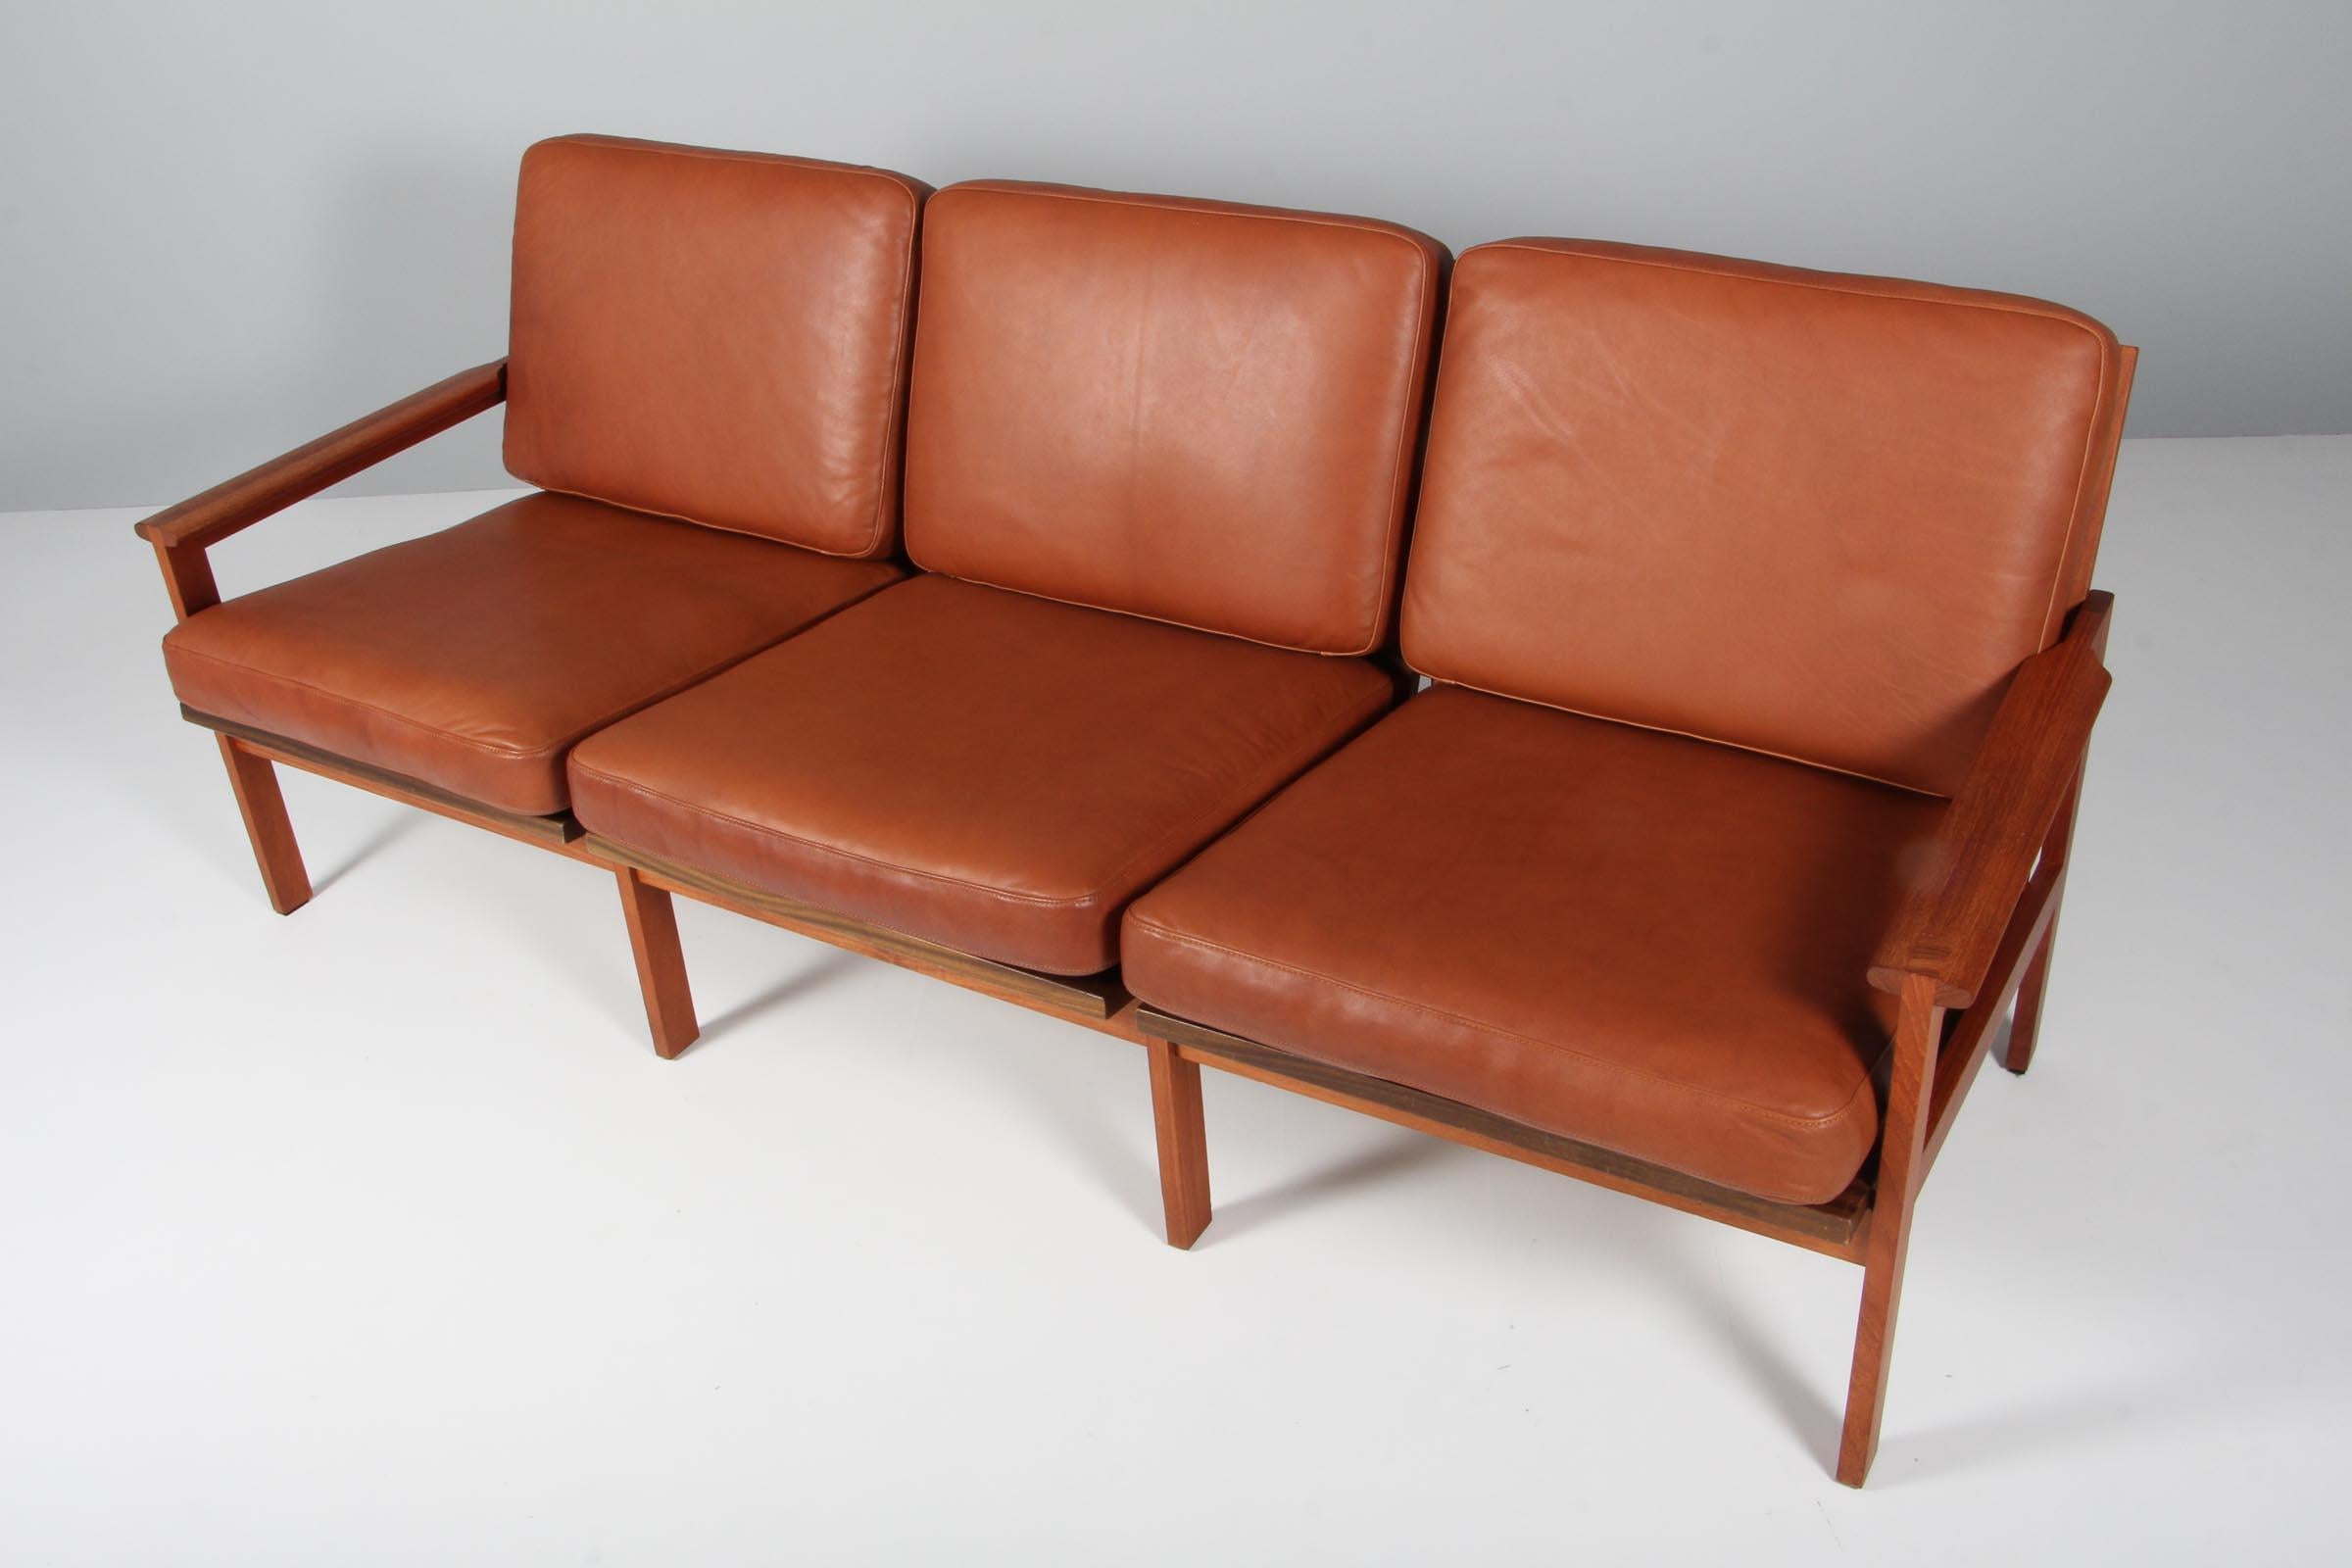 Illum Wikkelso for N. Eilersen three seat sofa in solid teak.

New upholstered with brandy coloured aniline leather. 

Model Capella, made by N. Eilersen.
 